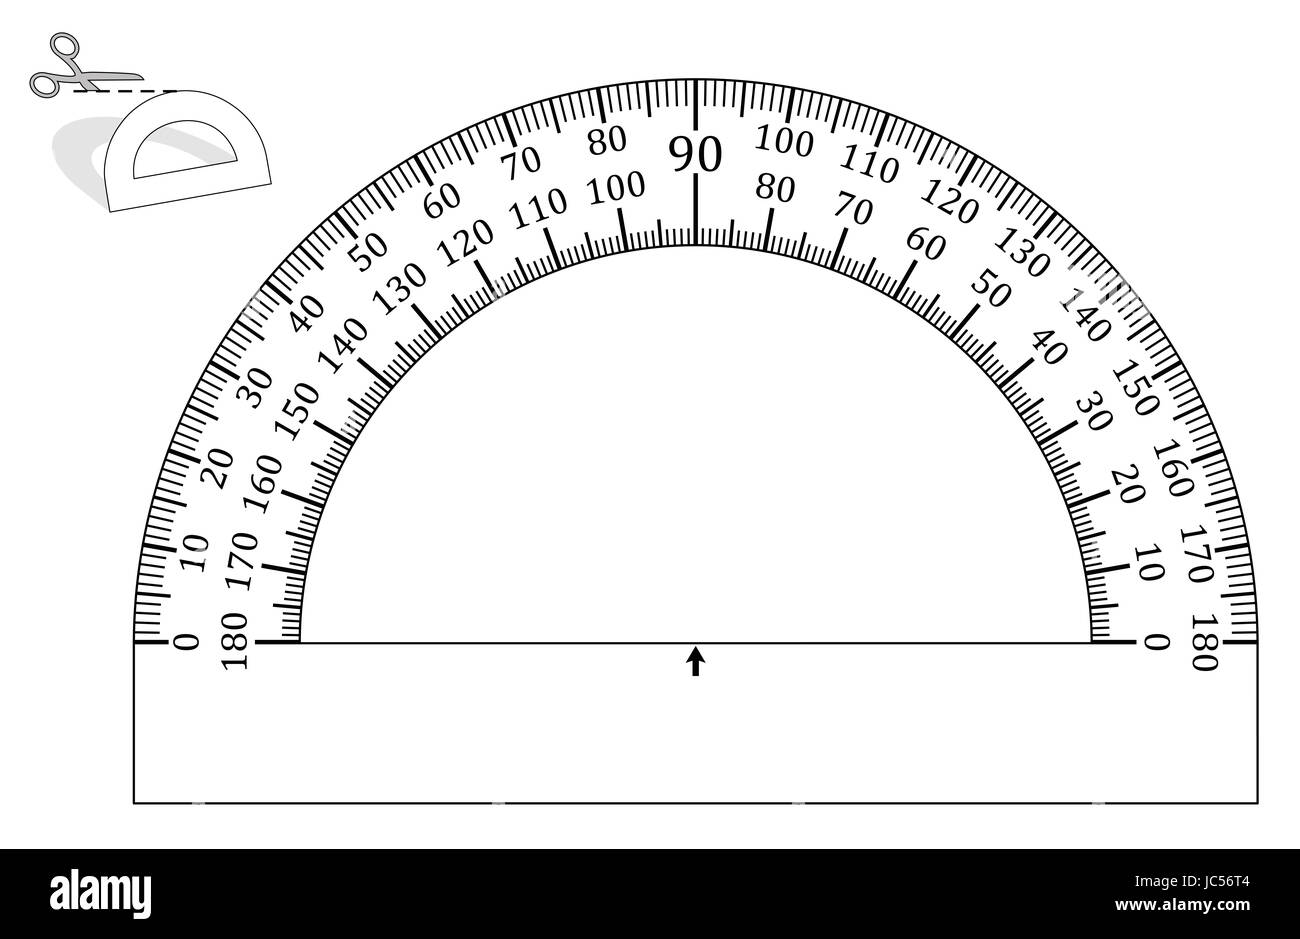 Protractor, paper model to cut out - print it on heavy paper, any page format, the angle measurement functions in each size. Stock Photo